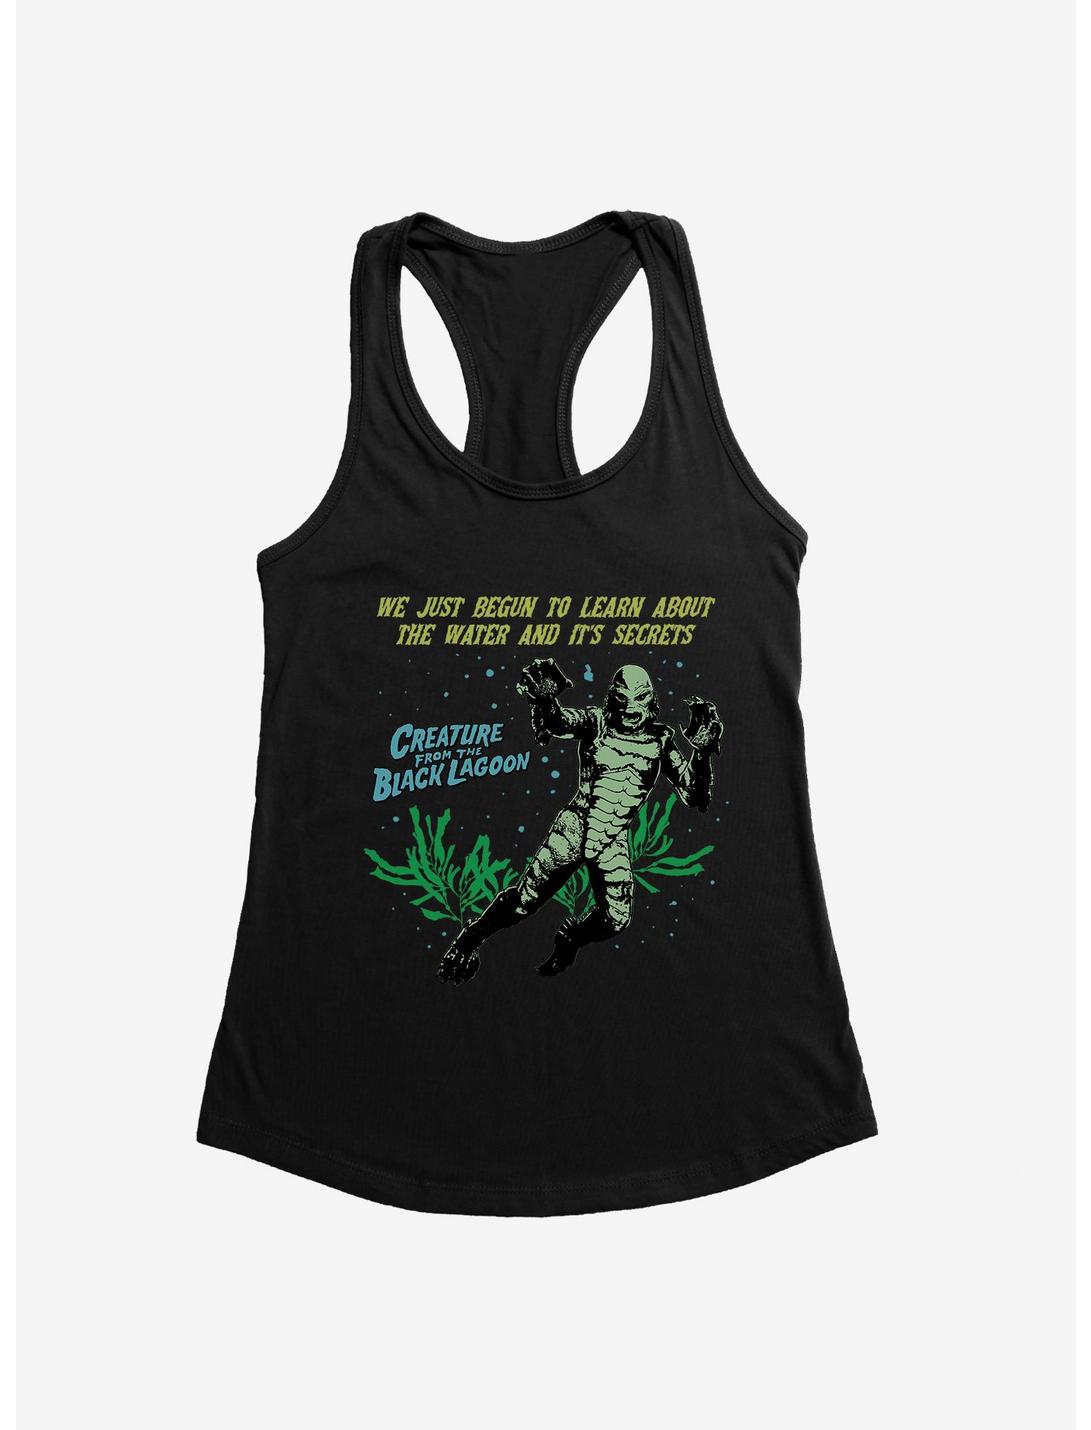 Creature From The Black Lagoon Water And It's Secrets Girls Tank, BLACK, hi-res